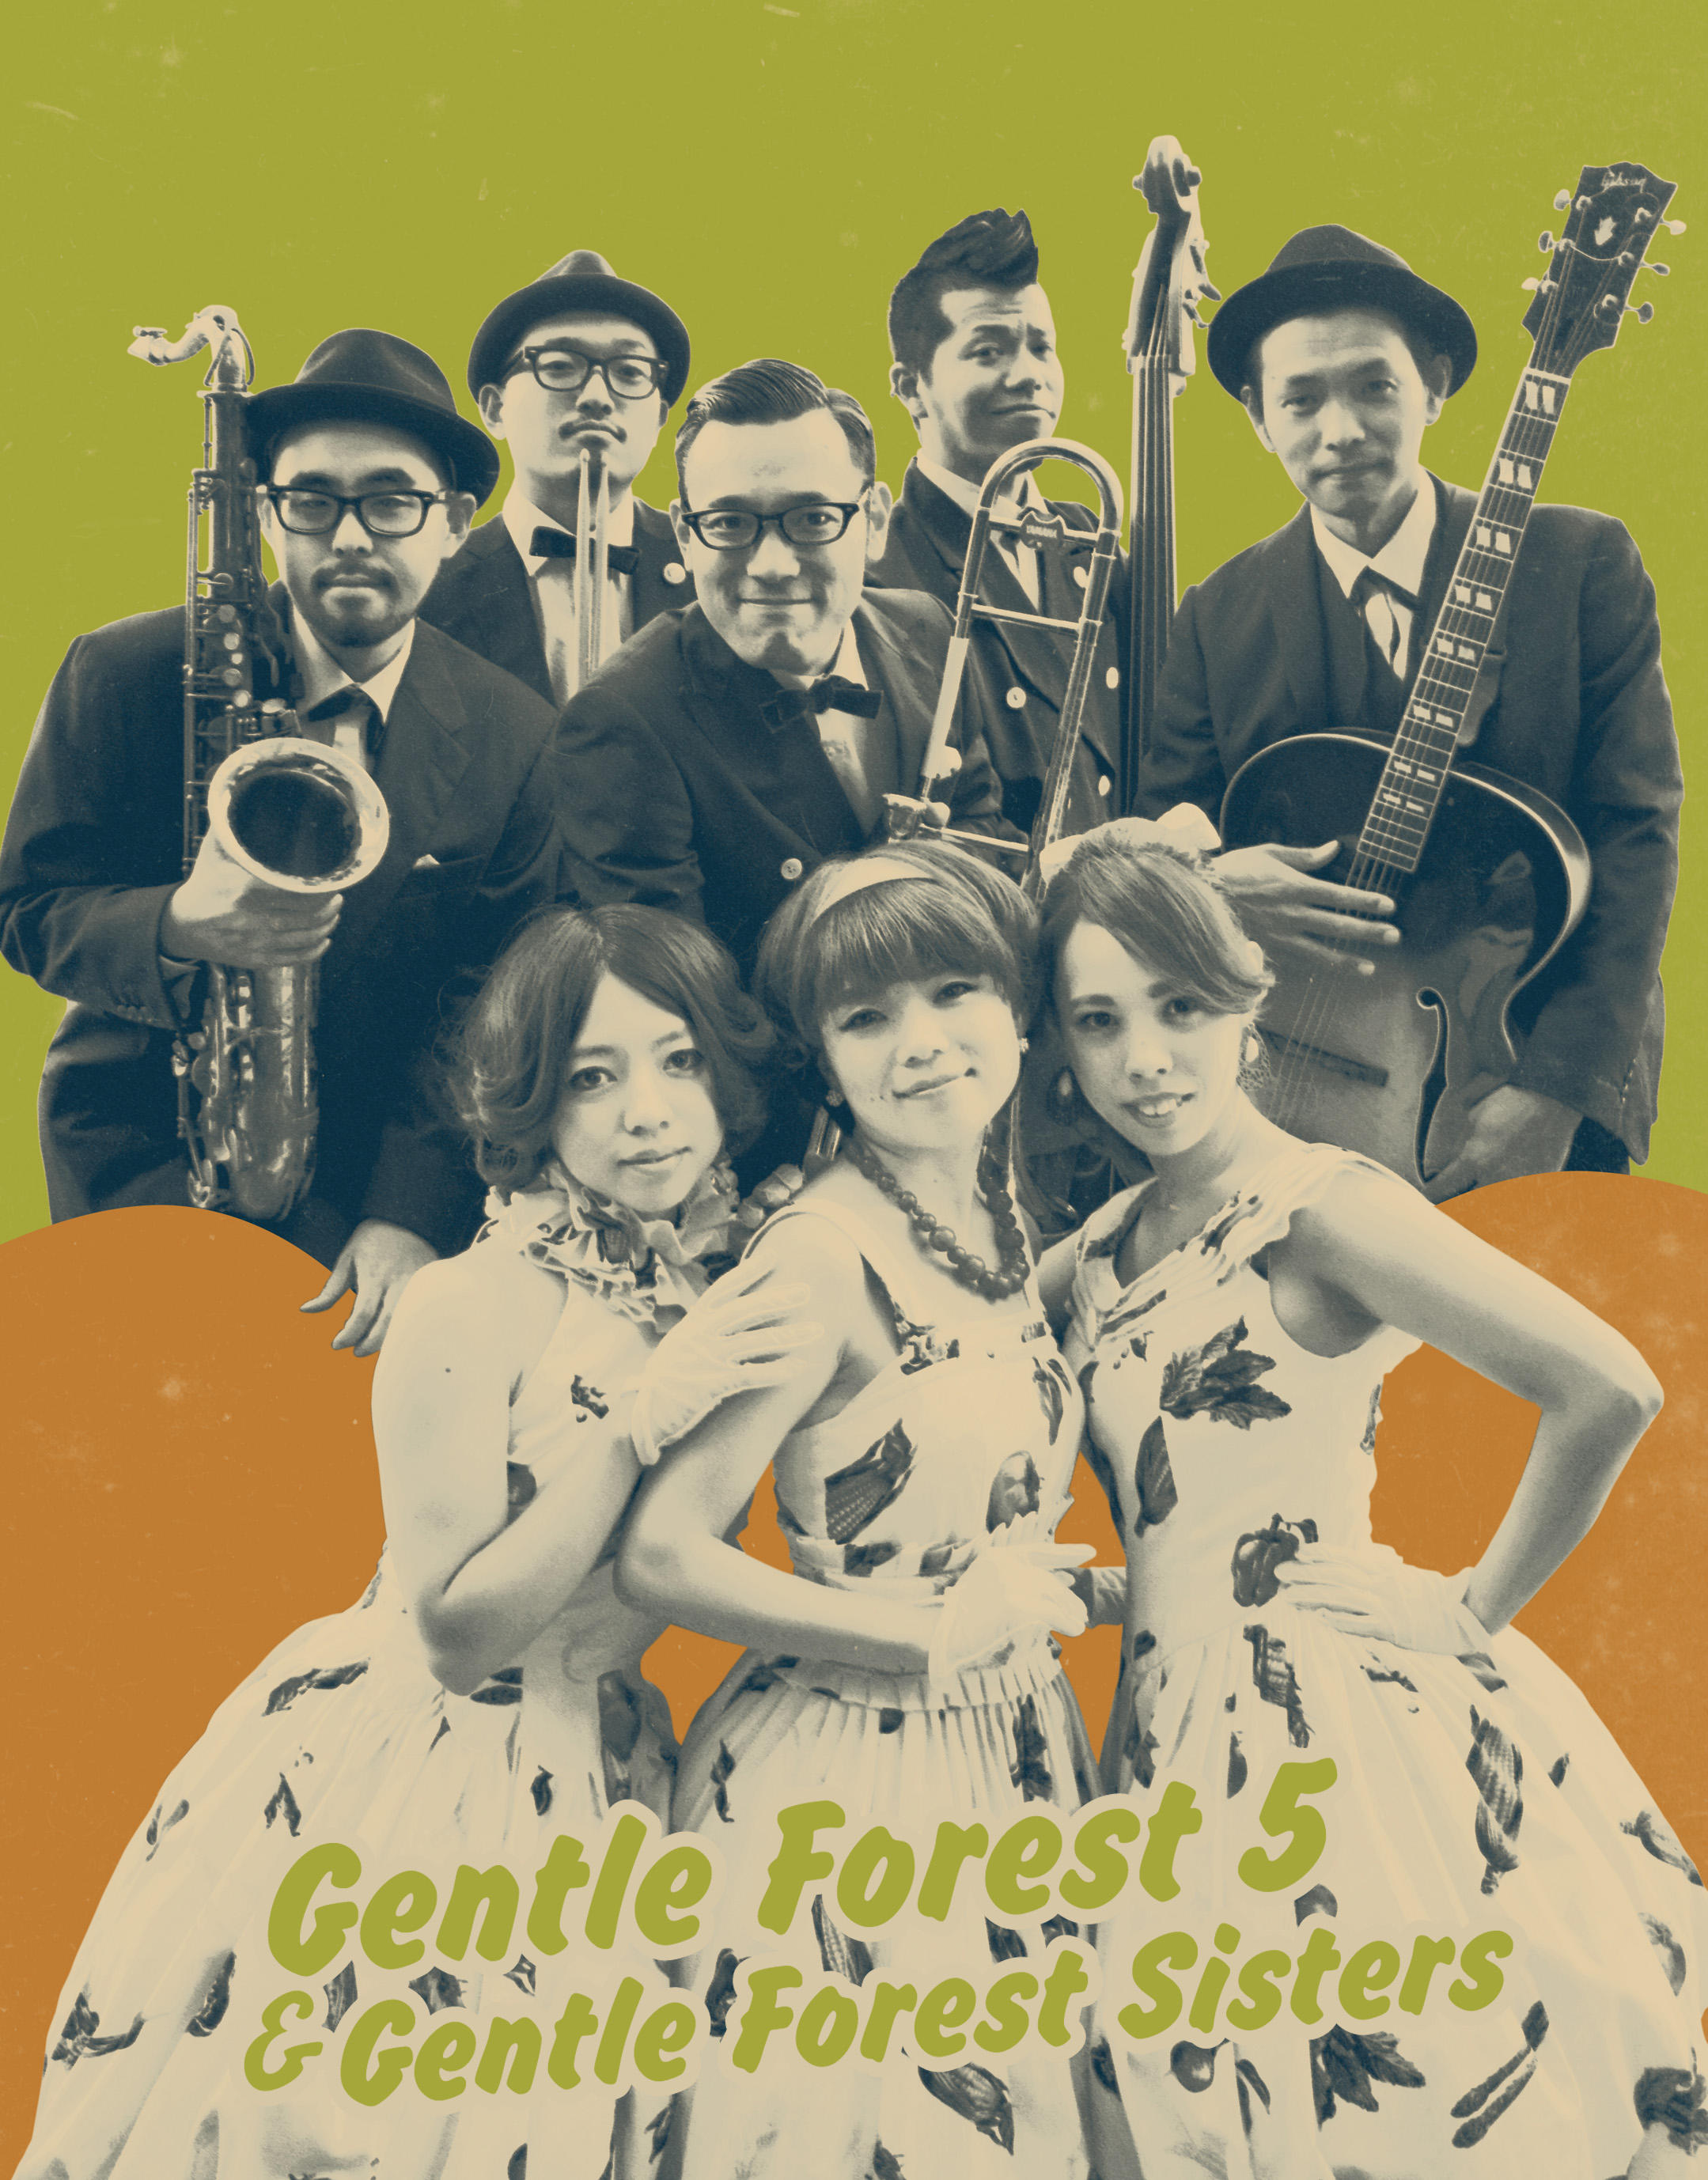 Gentle Forest 5 & Gentle Forest Sisters